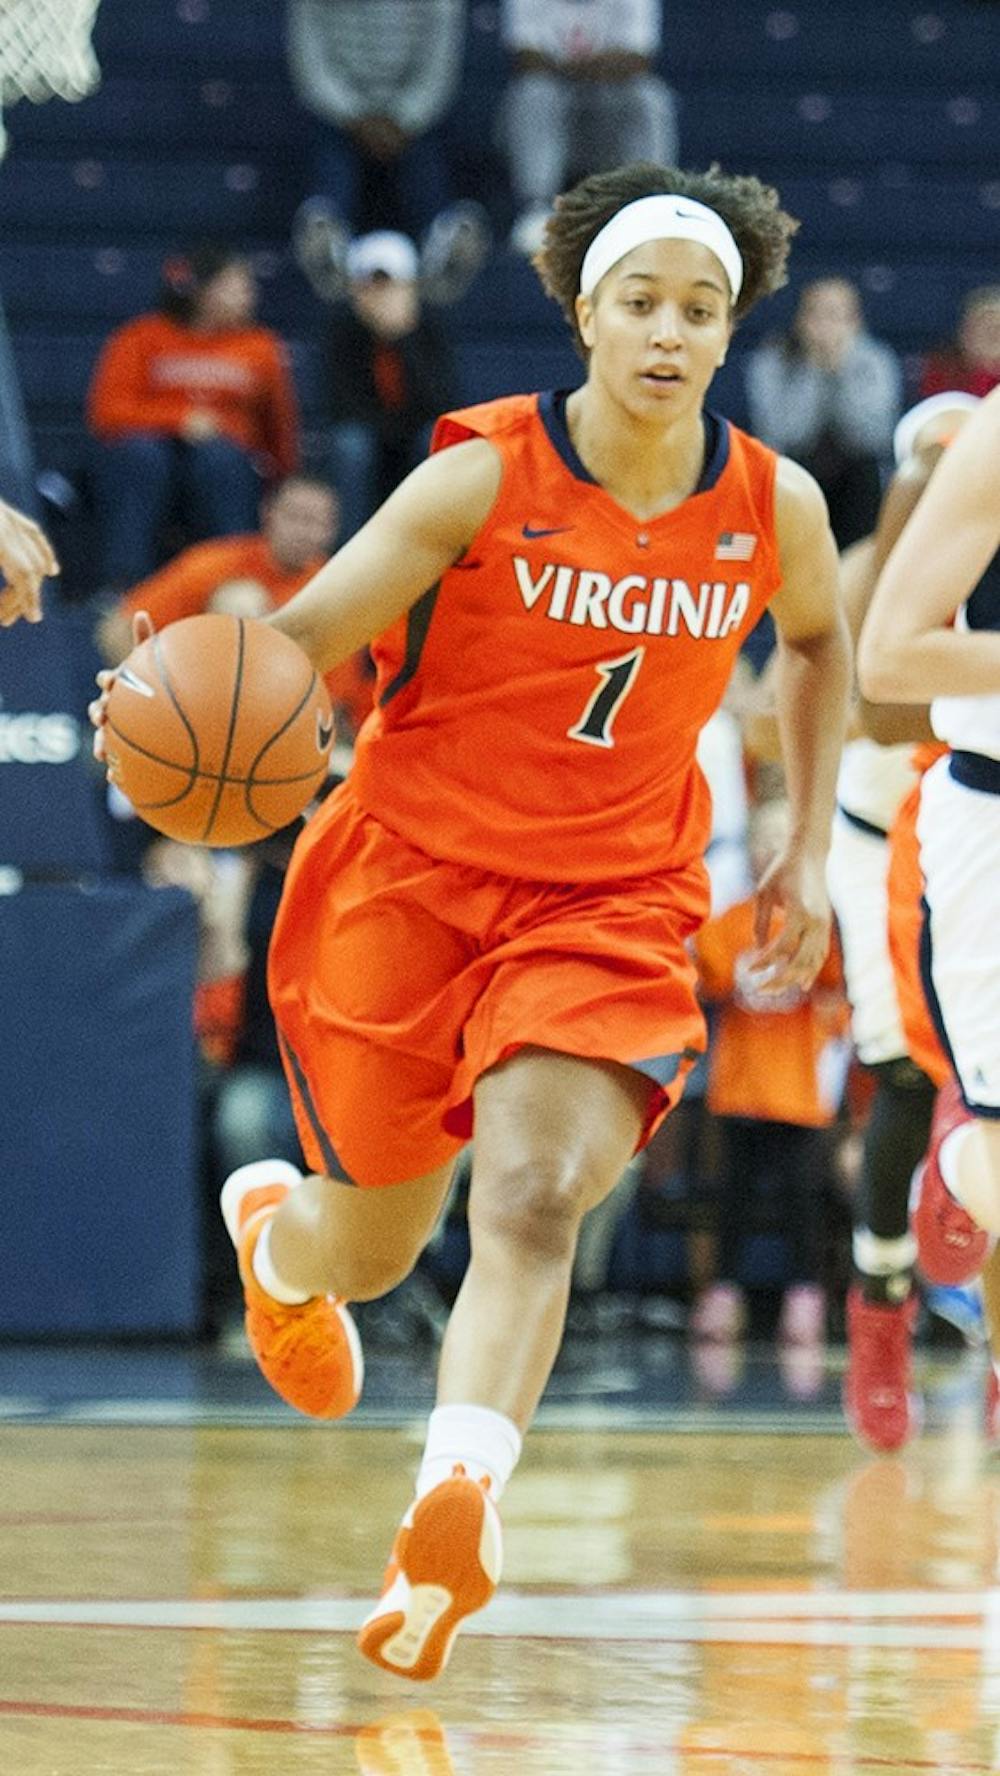 <p>Sophomore floor general Mikayla Venson averages 15.1 points per game to lead Virginia but scored only eight on 14 shots in the loss to Virginia Tech.&nbsp;</p>